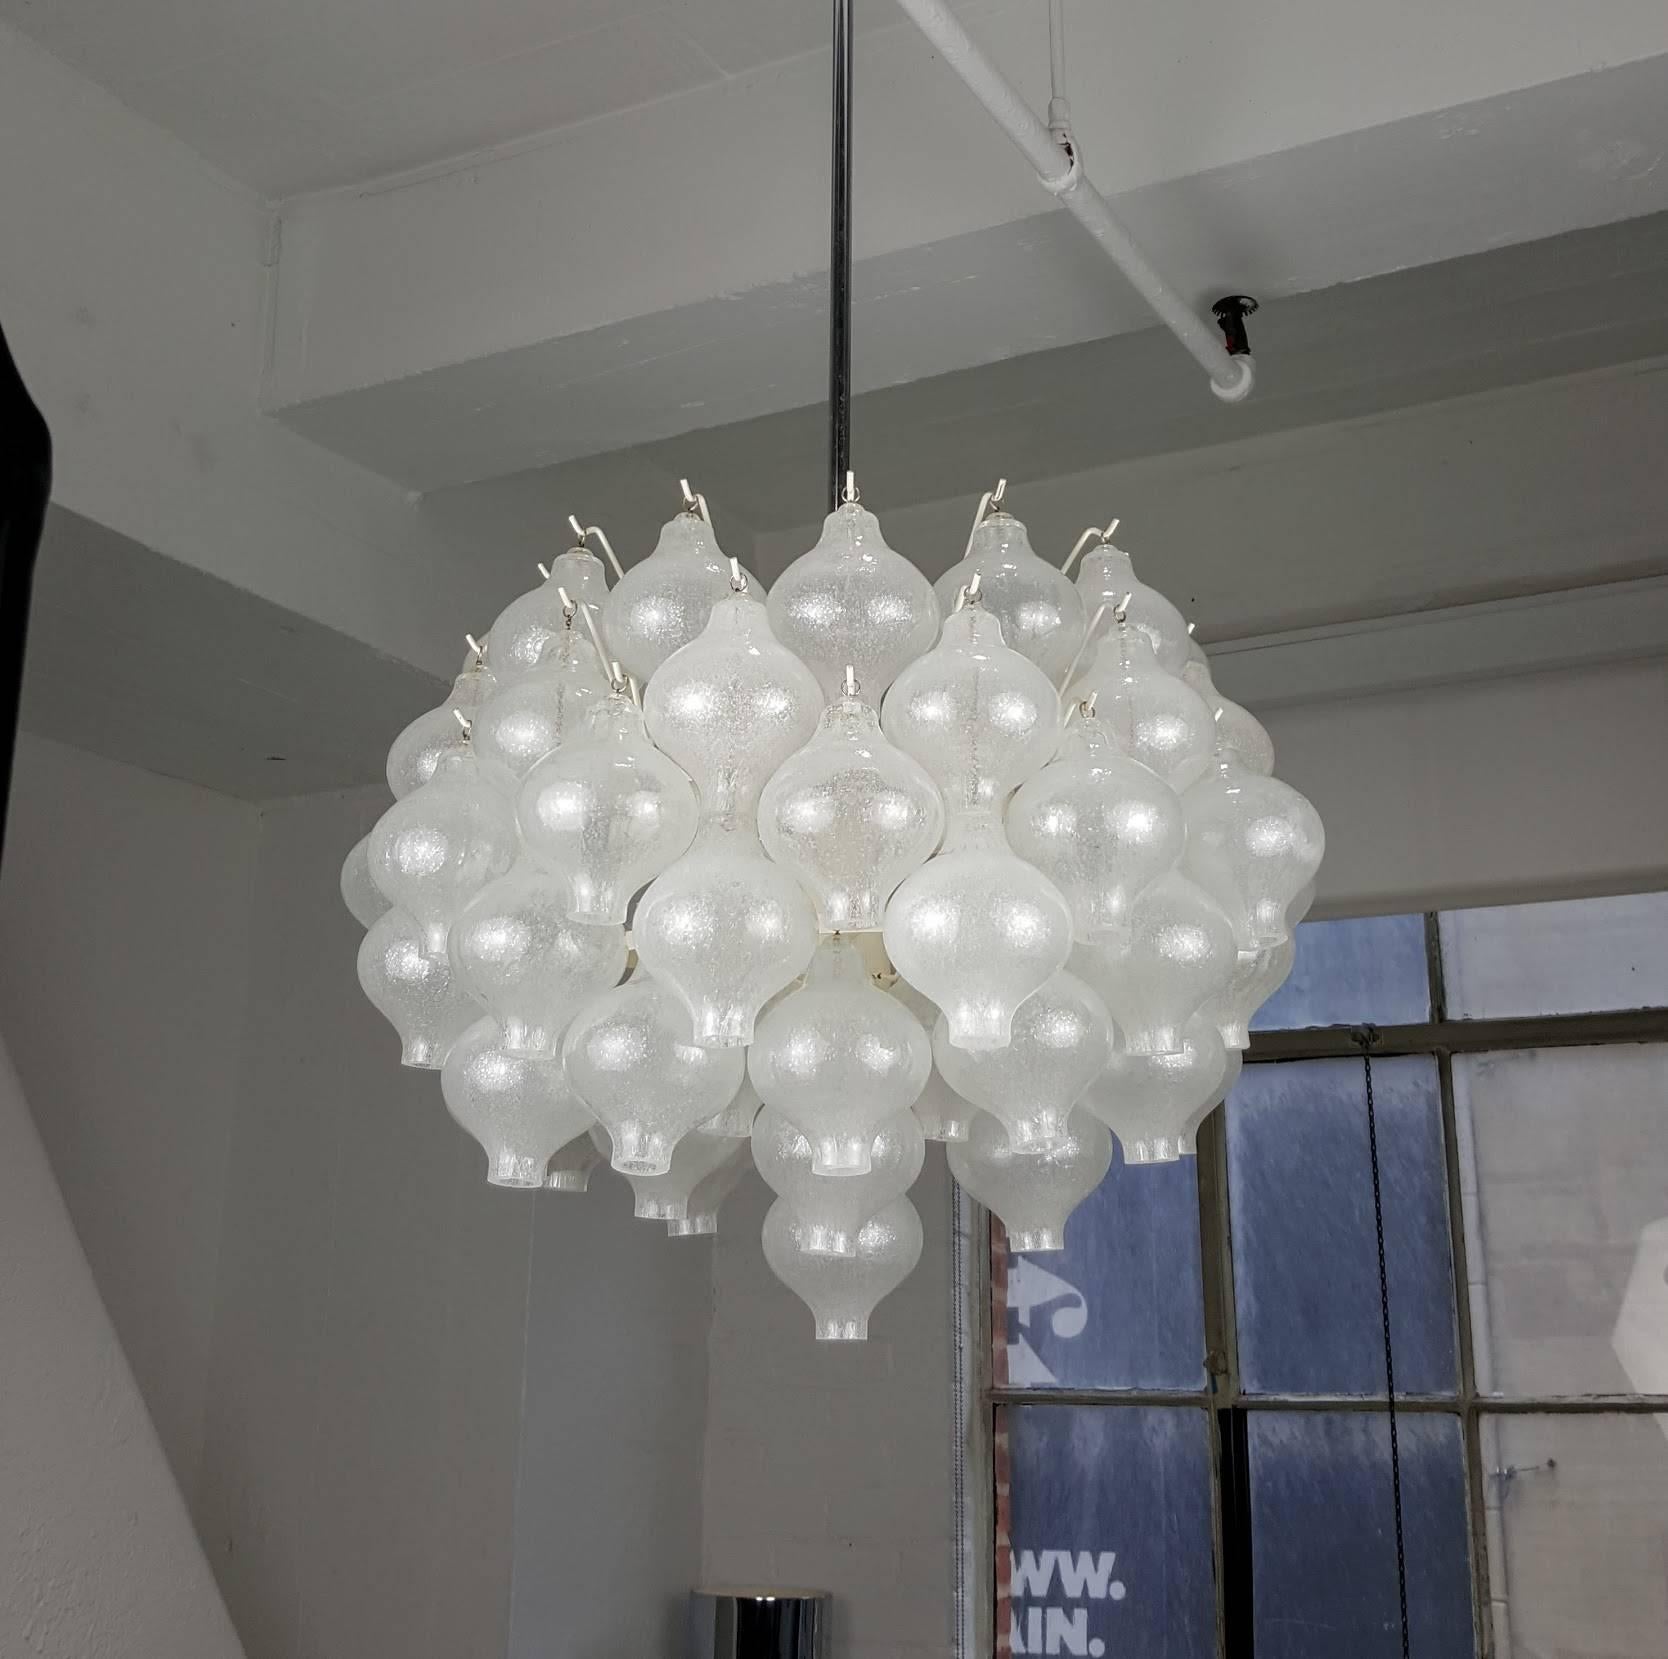 Large blown glass chandelier by Kalmar, Vienna. This is a rather large example of the chandelier. Glass sconces are bulbous  forms. Excellent condition with a few minor losses that are not visible in use.

Total height is 38" but can be